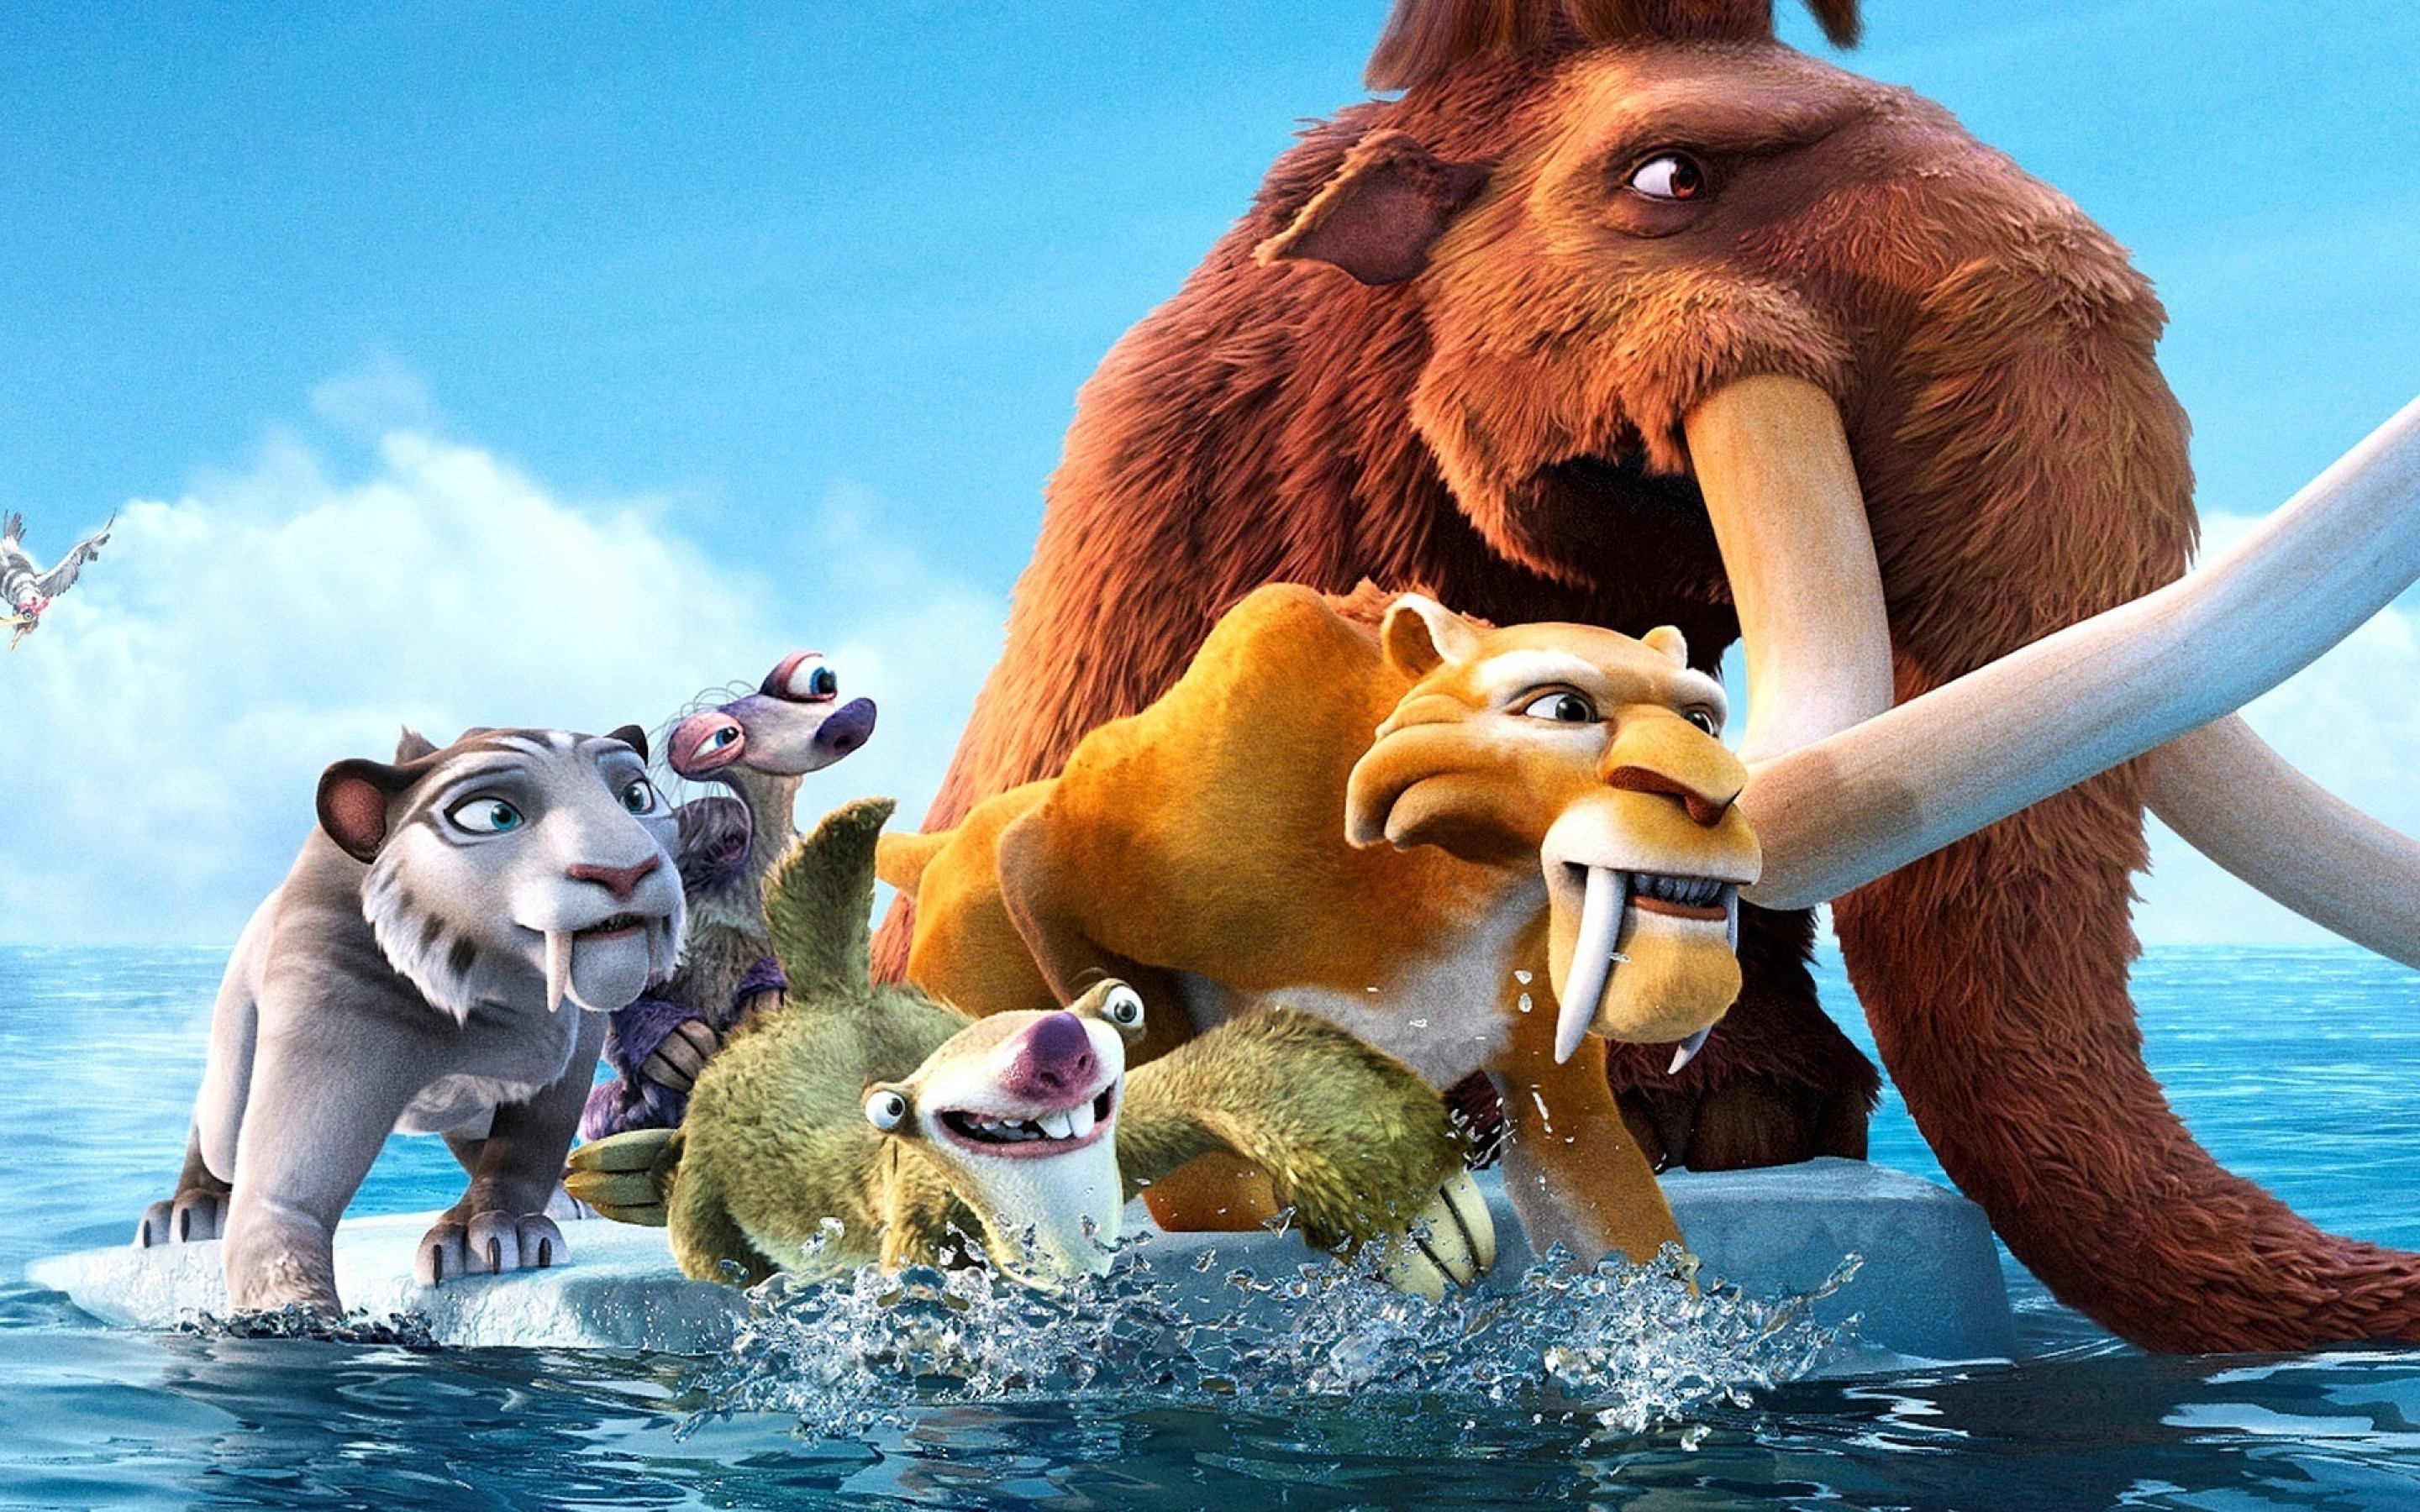 Ice Age franchise, Ice age continental drift, Mammal wallpaper, Fabianoliver's top pick, 2880x1800 HD Desktop